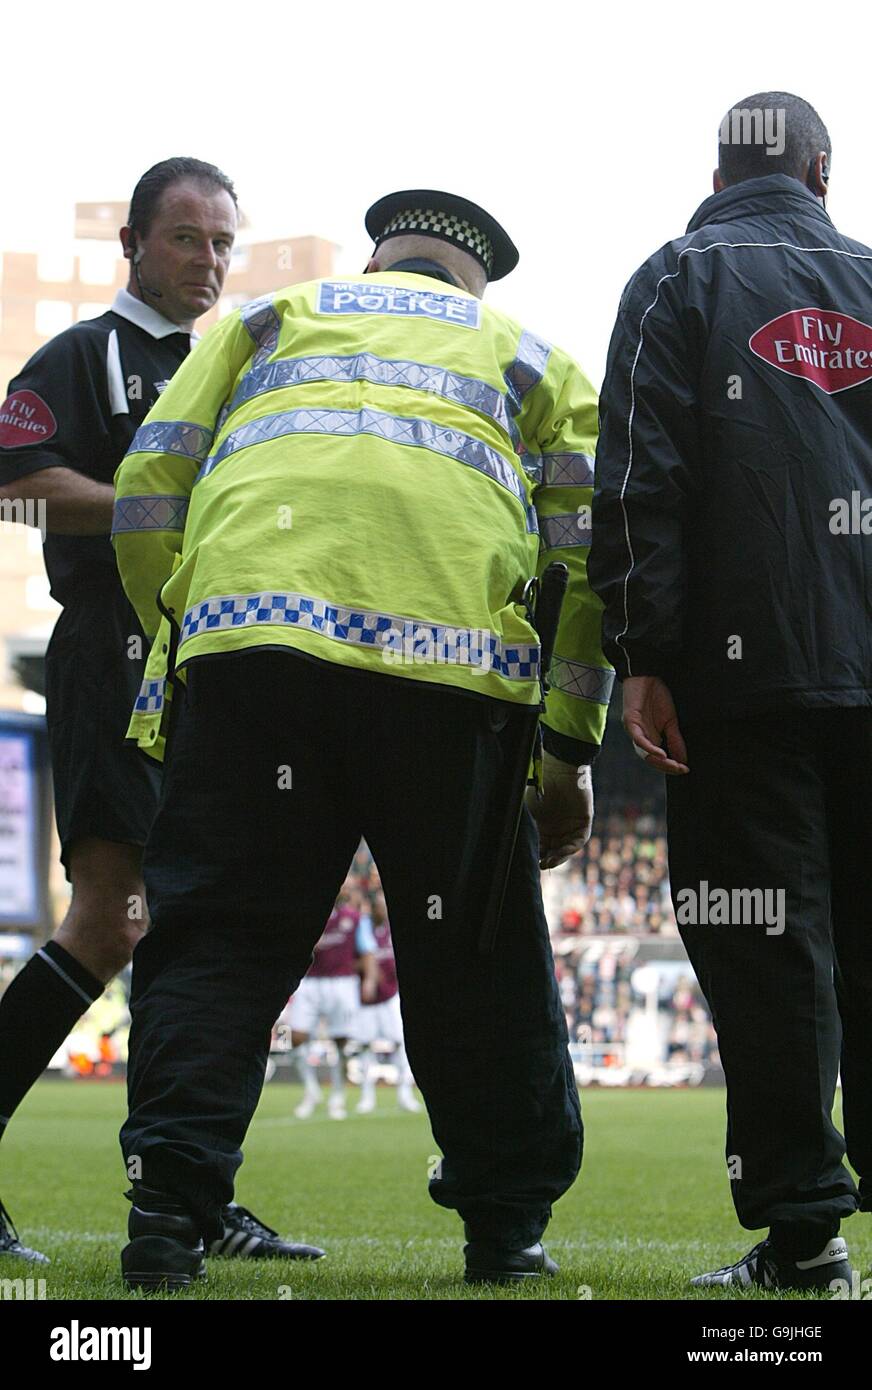 Soccer - FA Barclays Premiership - West Ham United v Arsenal - Upton Park. A Police officer picks the object that was thrown from the crowd hitting Arsenal's Robin van Persie Stock Photo